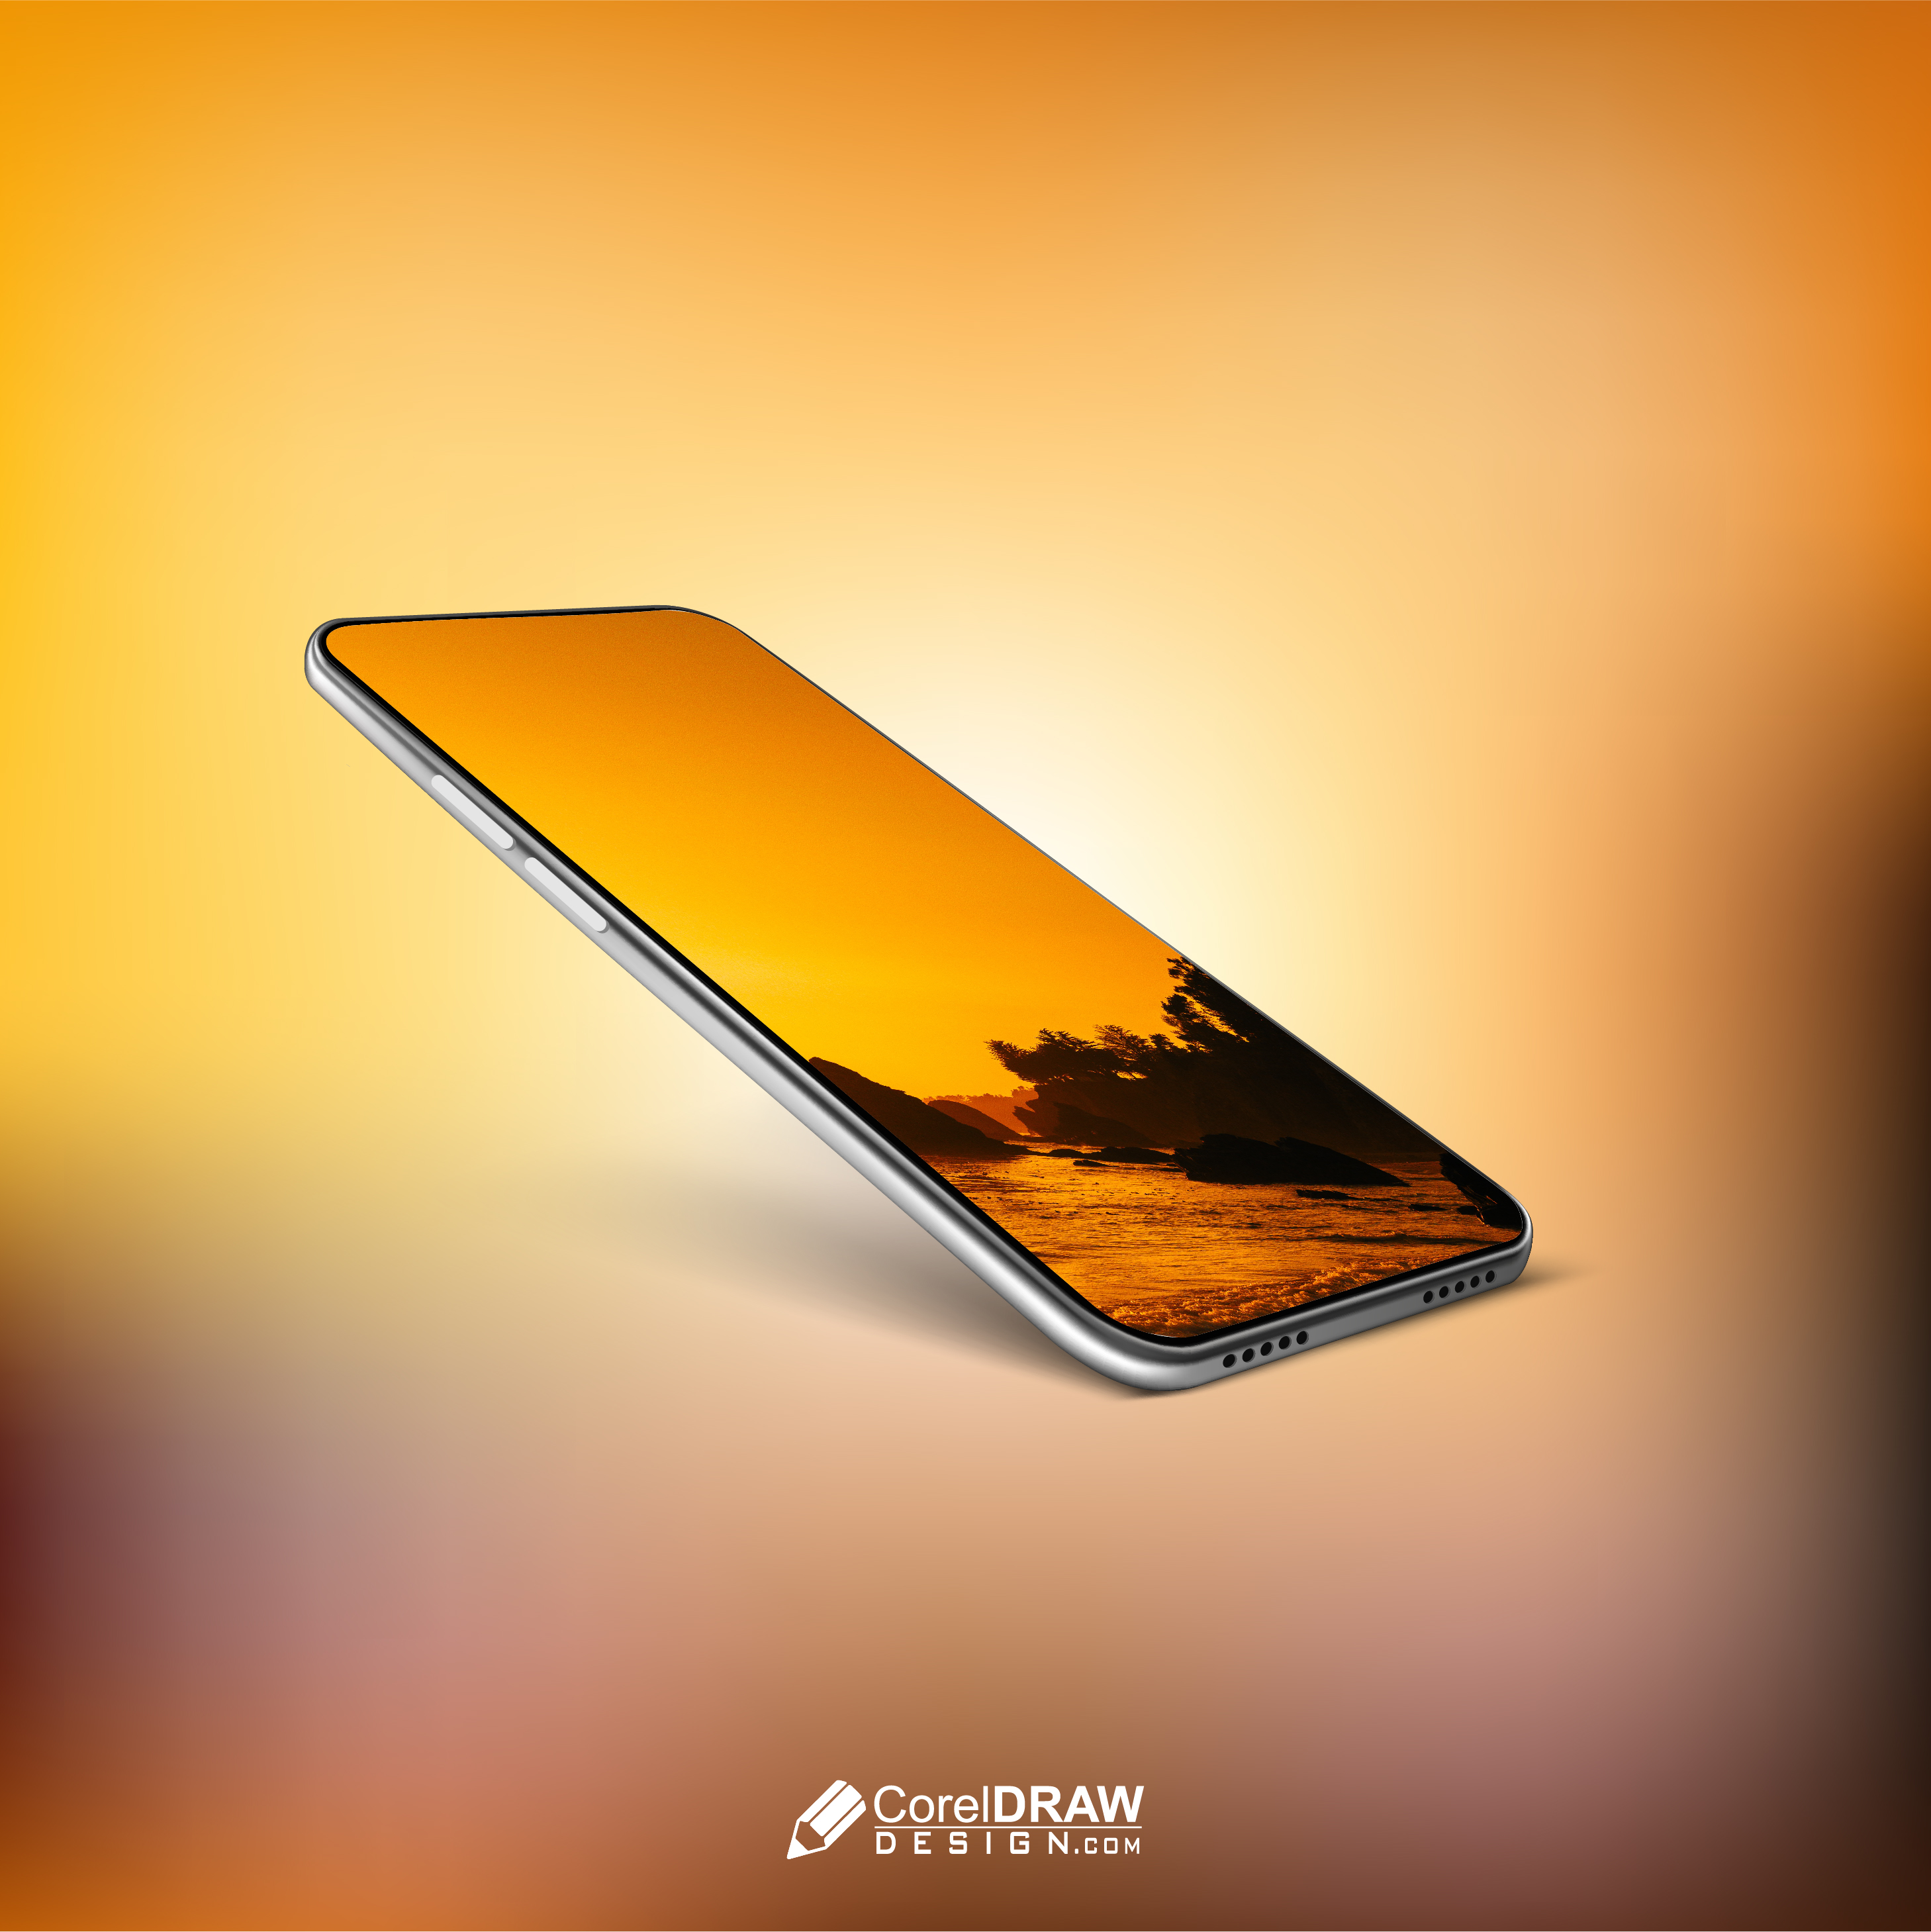 Abstract Beautiful Android Mobile Showcase advertisement Mockup